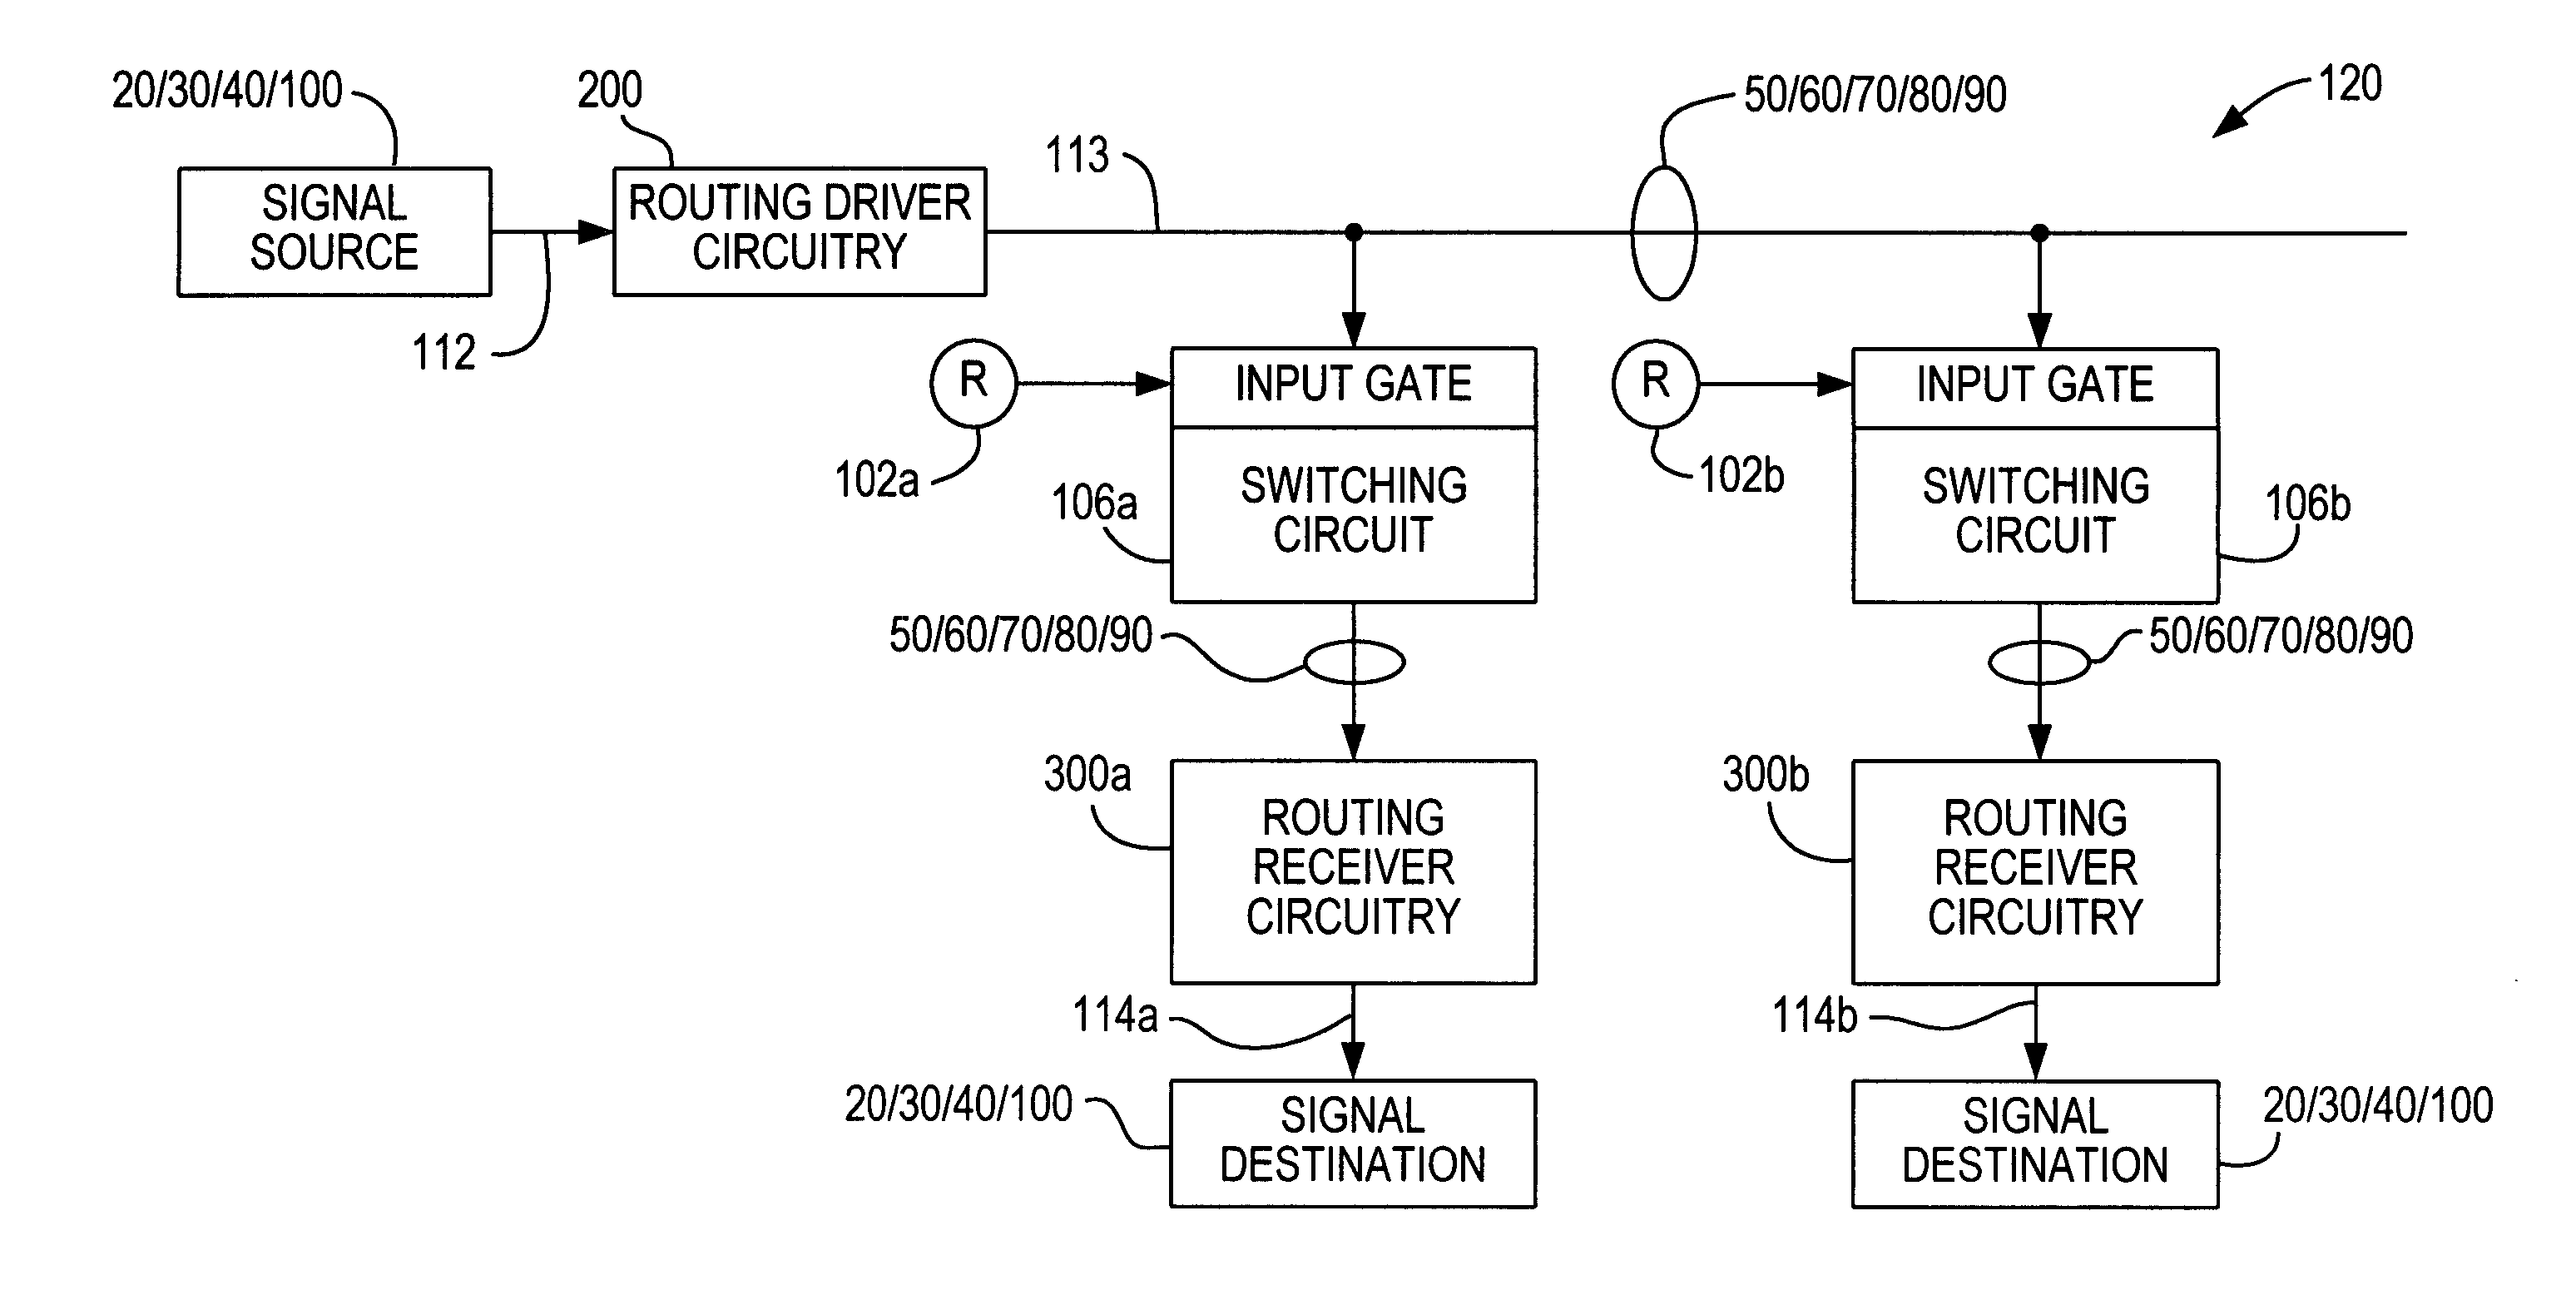 Methods of reducing power in programmable logic devices using low voltage swing for routing signals